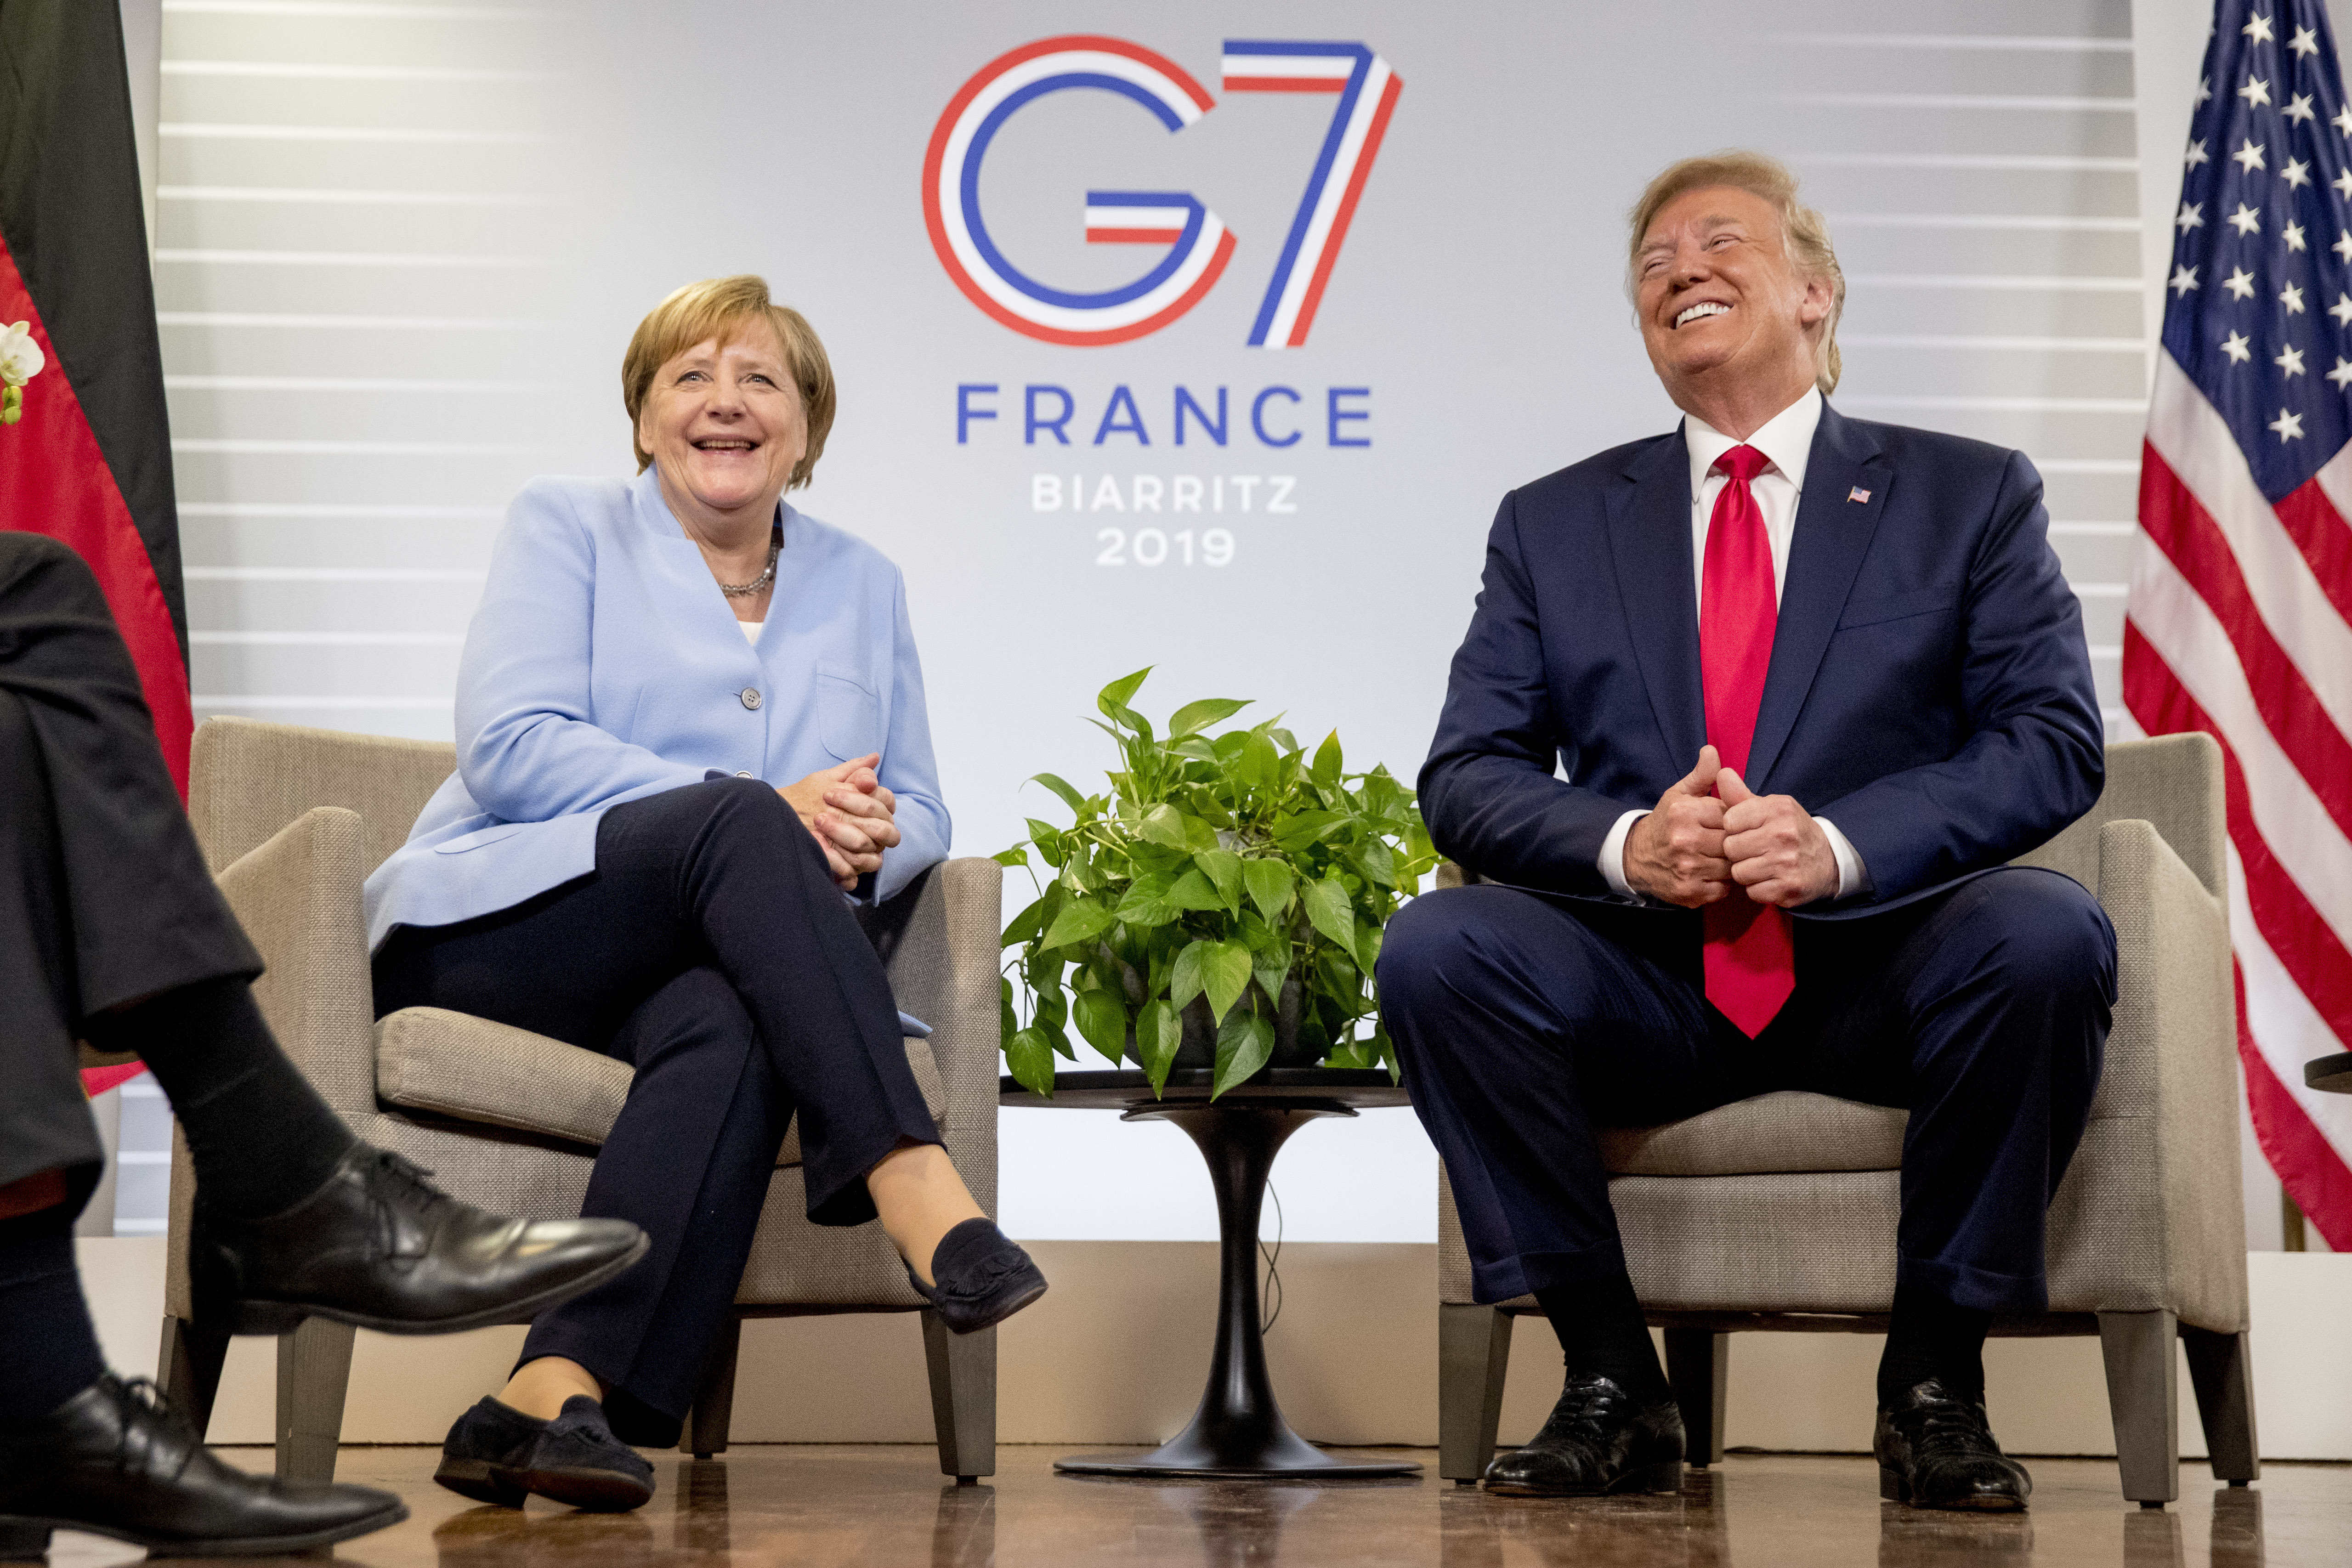 U.S. President Donald Trump and German Chancellor Angela Merkel laugh during a bilateral meeting at the G-7 summit in Biarritz, France, Monday, Aug. 26, 2019. (AP Photo/Andrew Harnik)